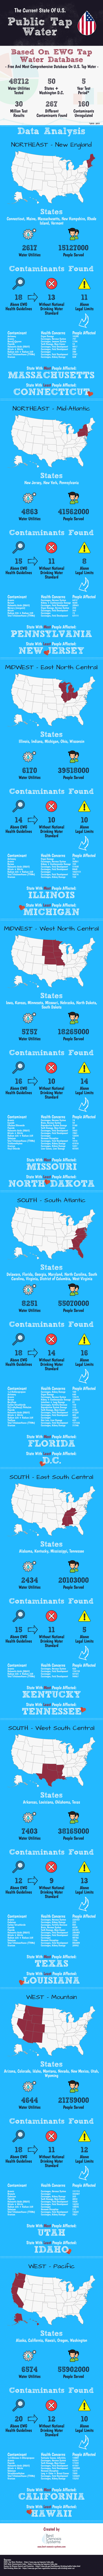 Infographic About U.S. Tap Water by best-osmosis-systems.com